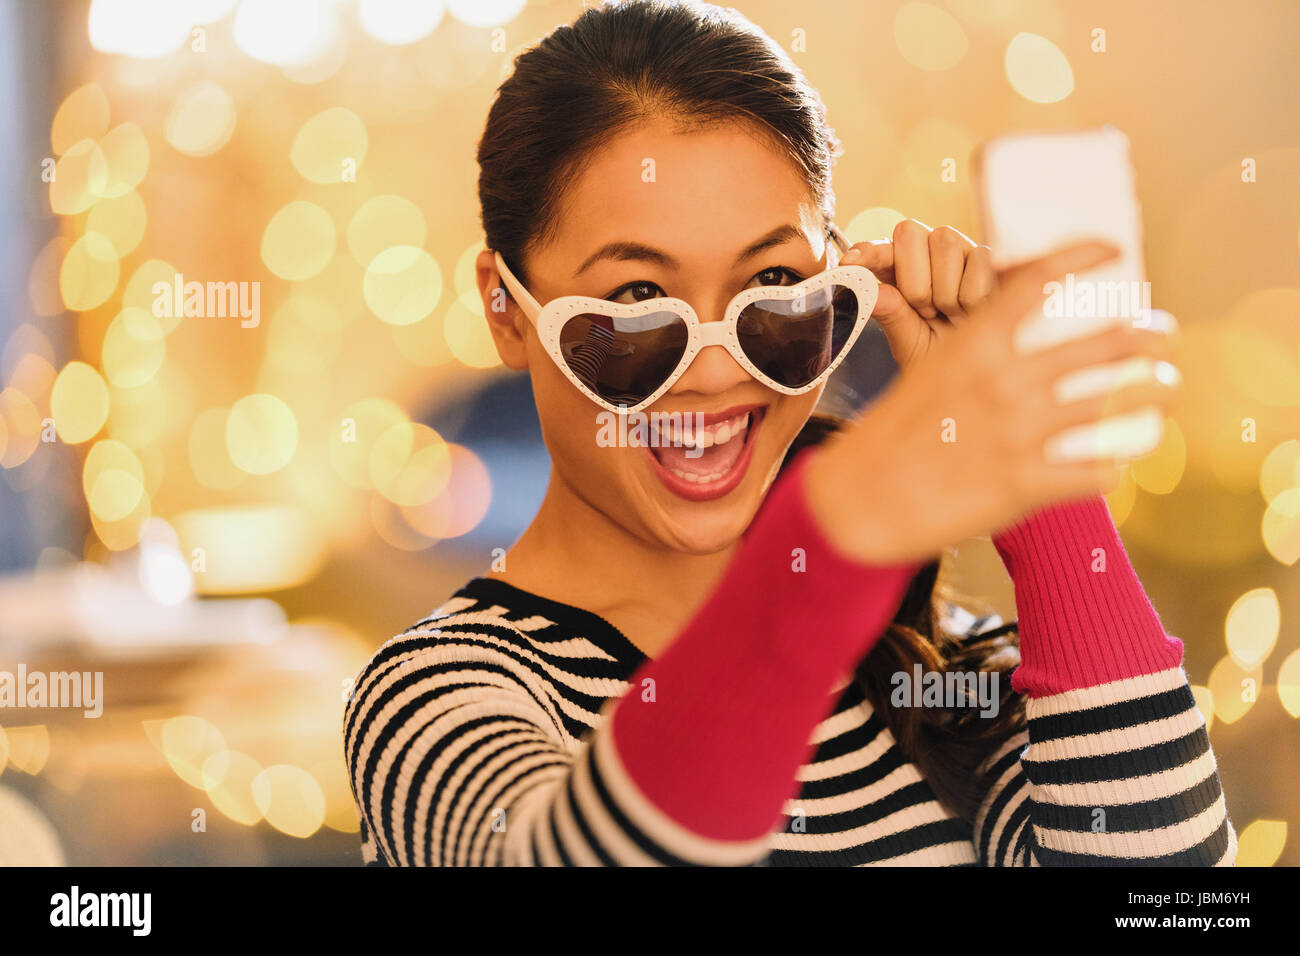 Playful Chinese woman wearing heart-shape glasses taking selfie with camera phone Stock Photo